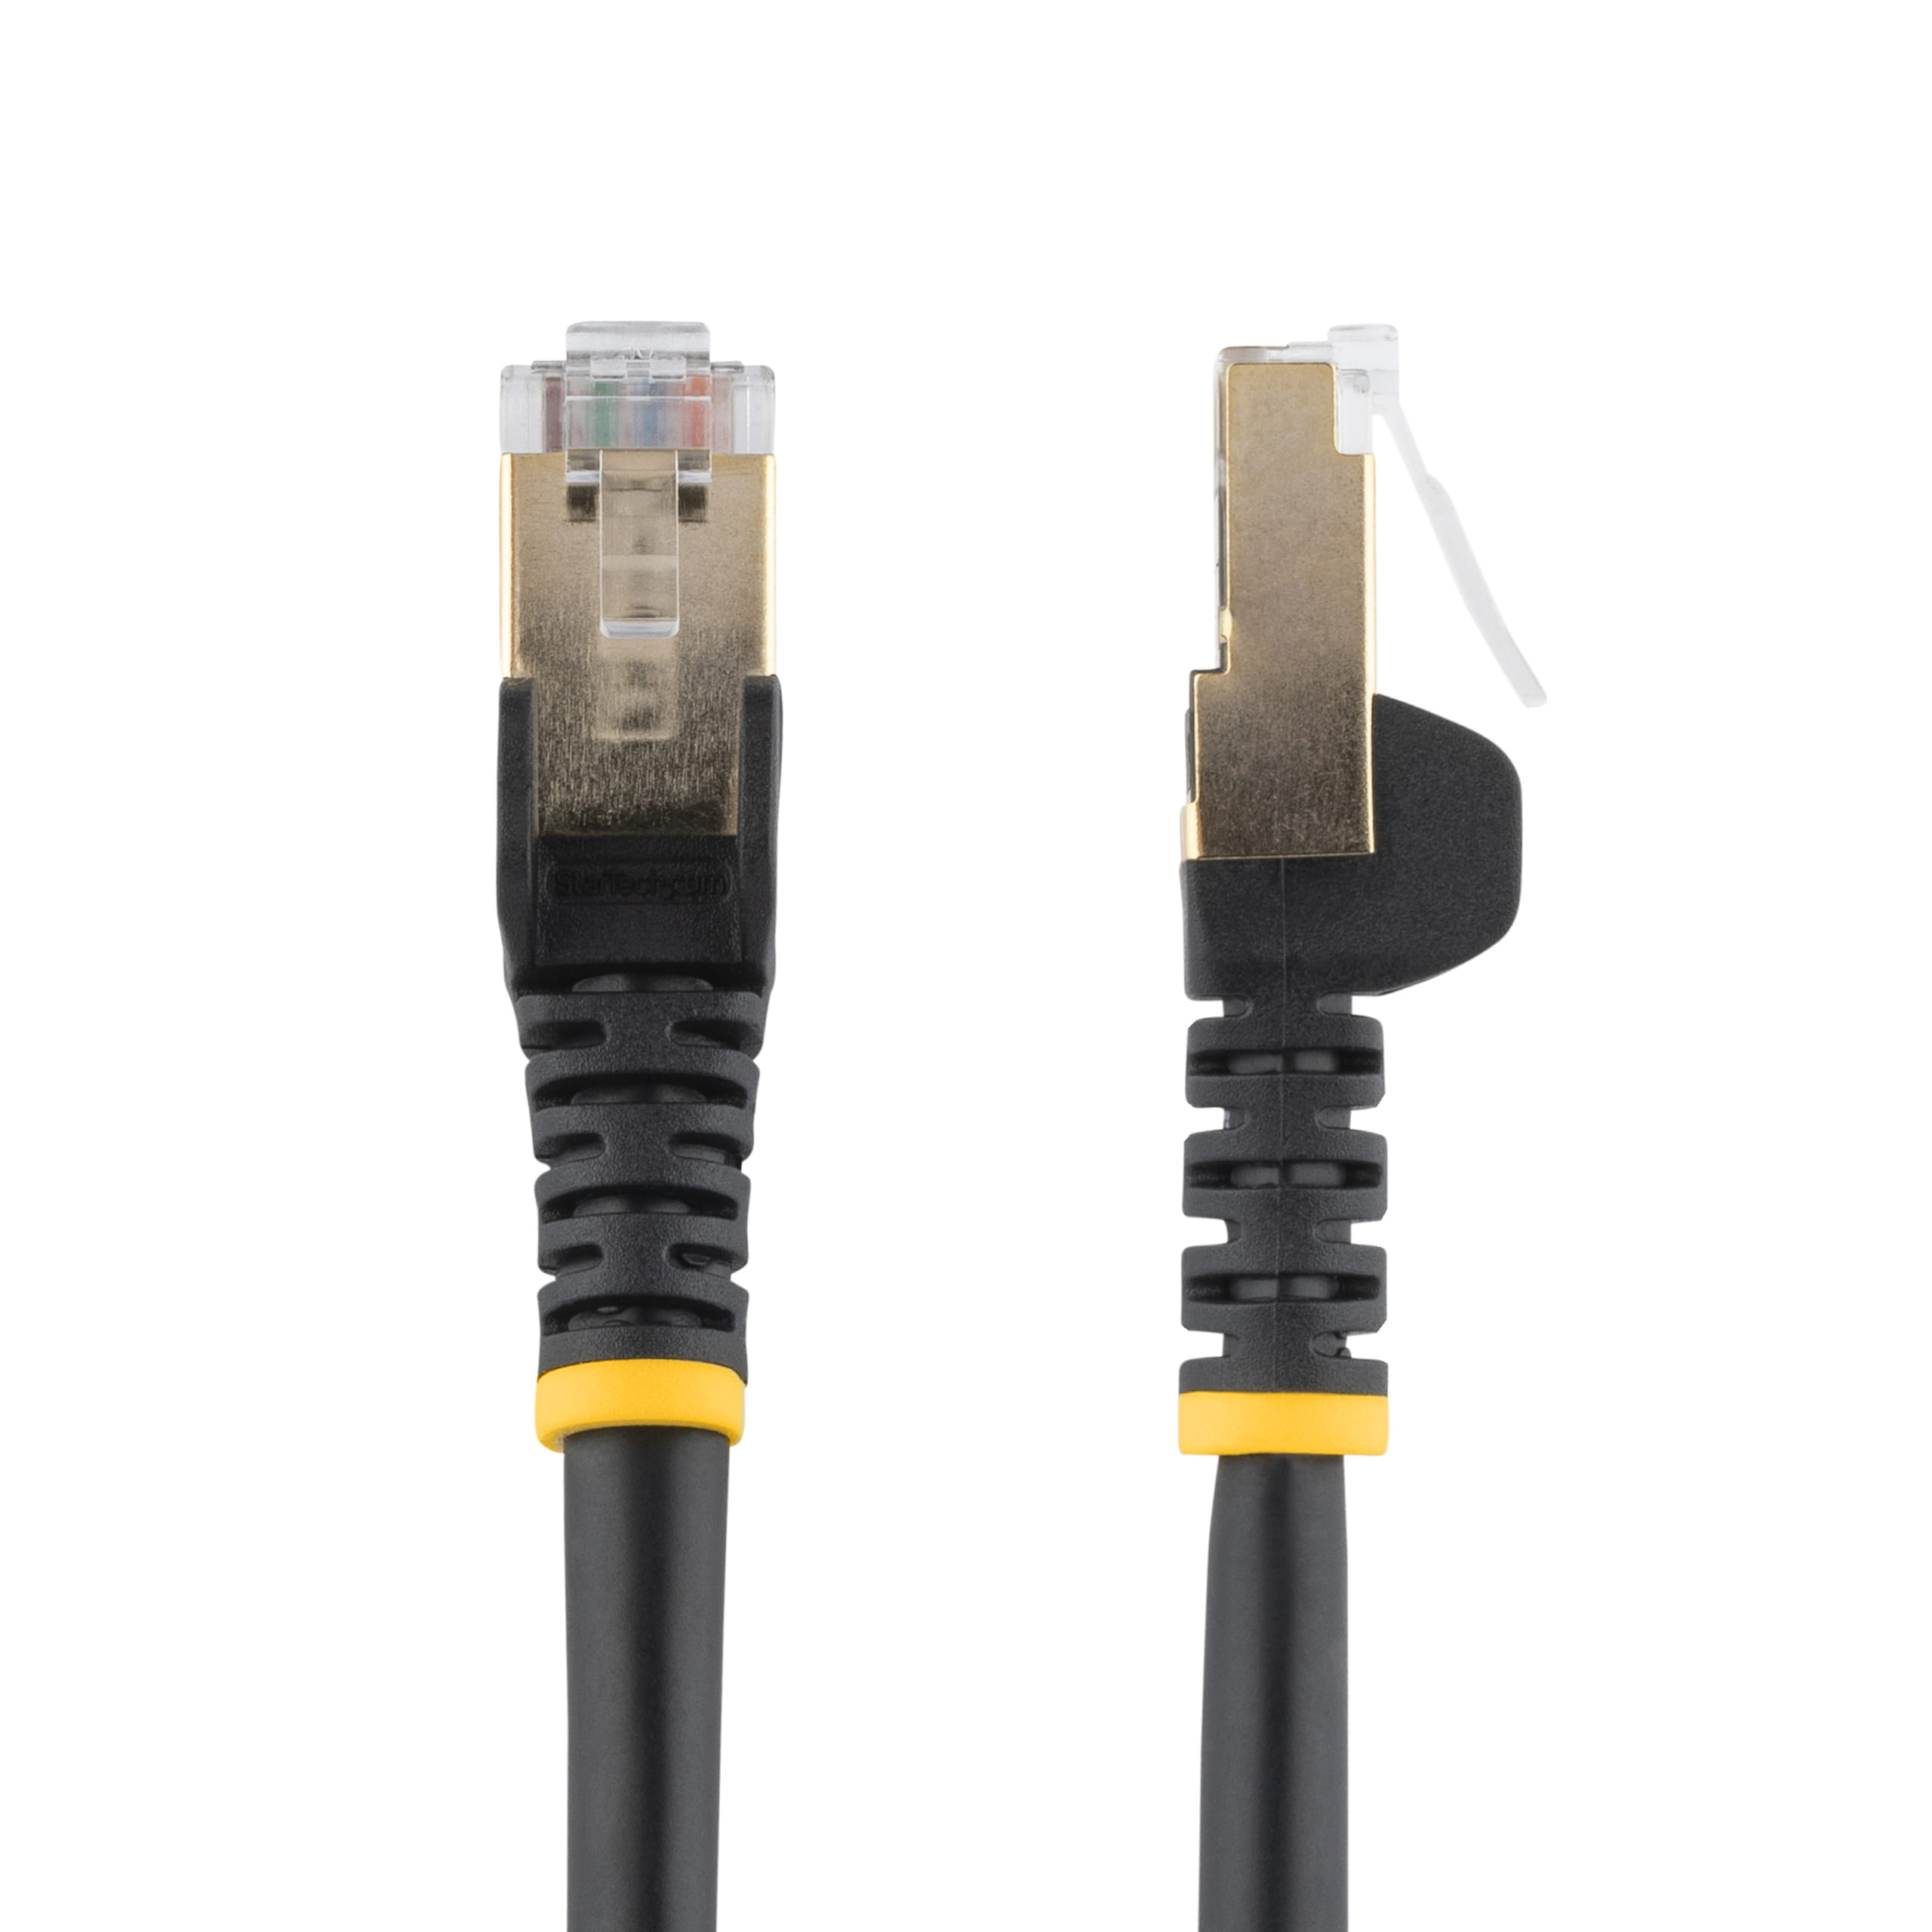 StarTech.com 50cm CAT6A Ethernet Cable, 10 Gigabit Shielded Snagless RJ45 100W PoE Patch Cord, CAT 6A 10GbE STP Network Cable w/Strain Relief, Black, Fluke Tested/UL Certified Wiring/TIA - Category 6A - 26AWG (6ASPAT50CMBK)